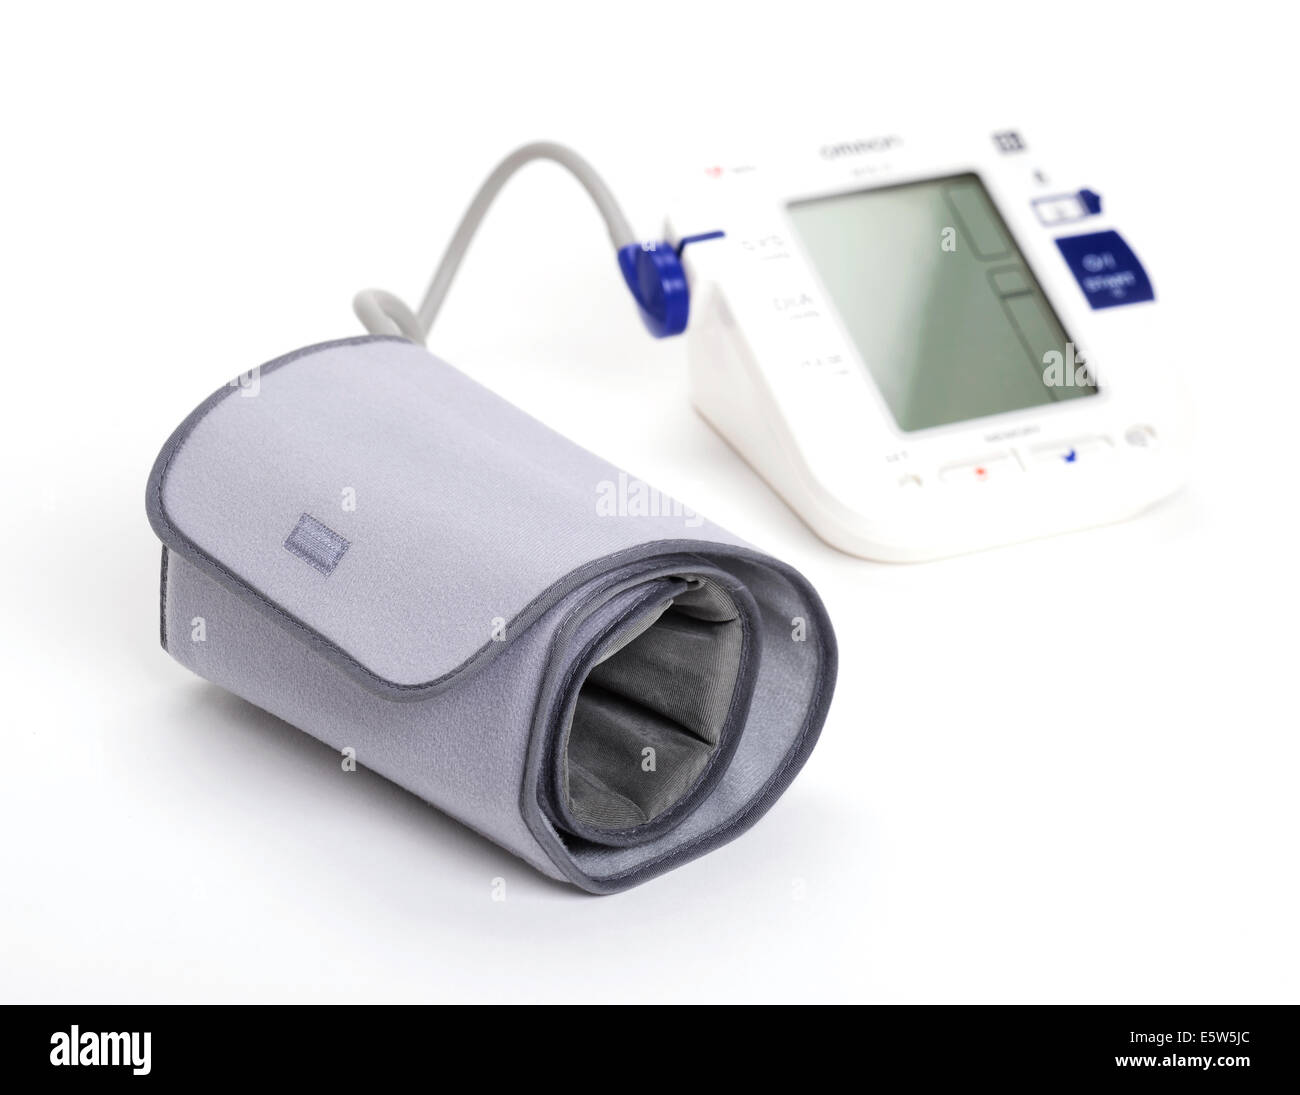 Omron blood pressure monitor with grey cuff Stock Photo